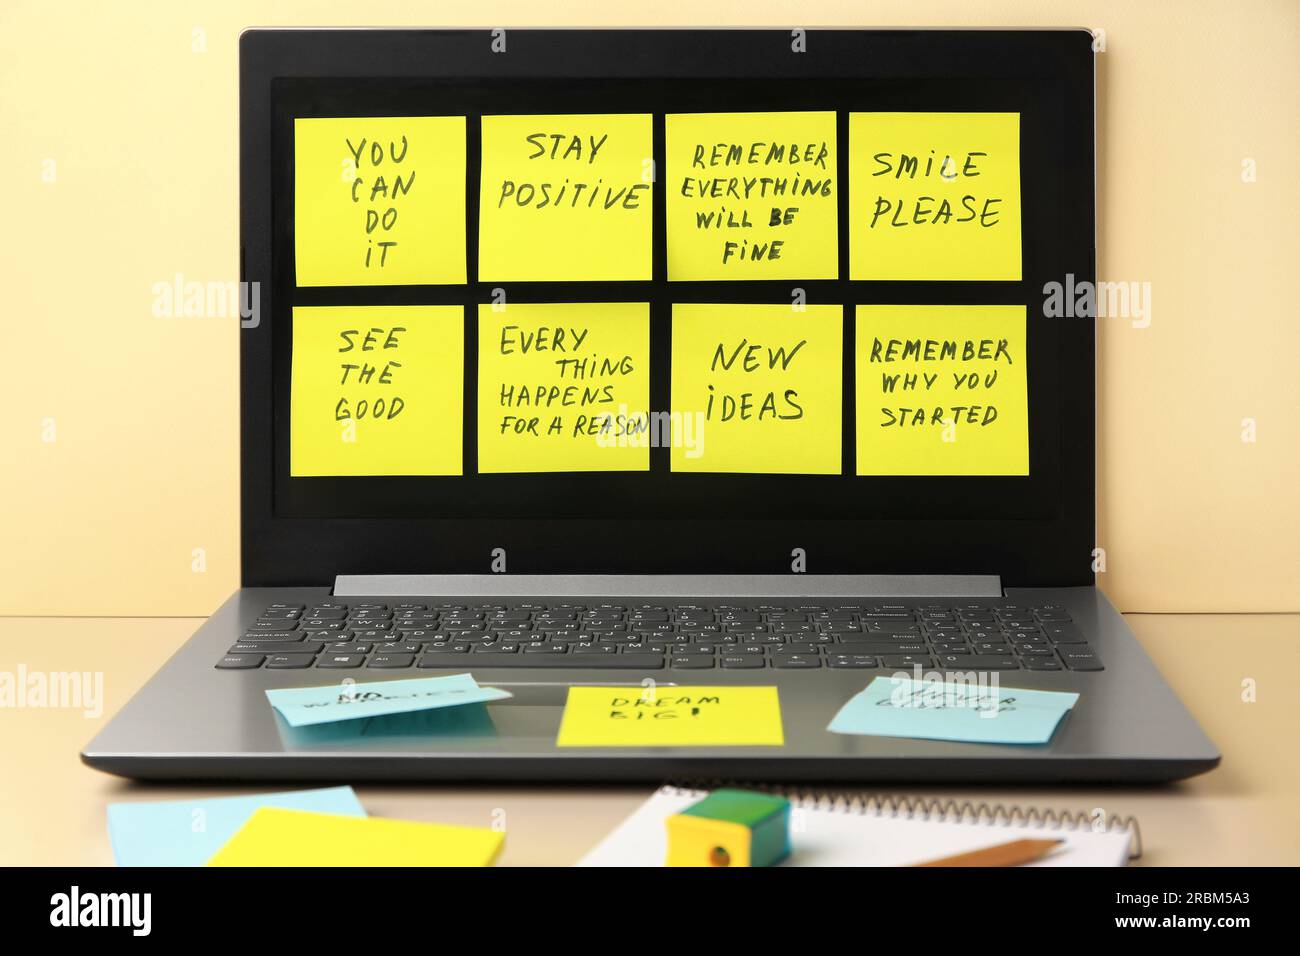 Paper notes with life-affirming phrases and laptop on table against beige background Stock Photo